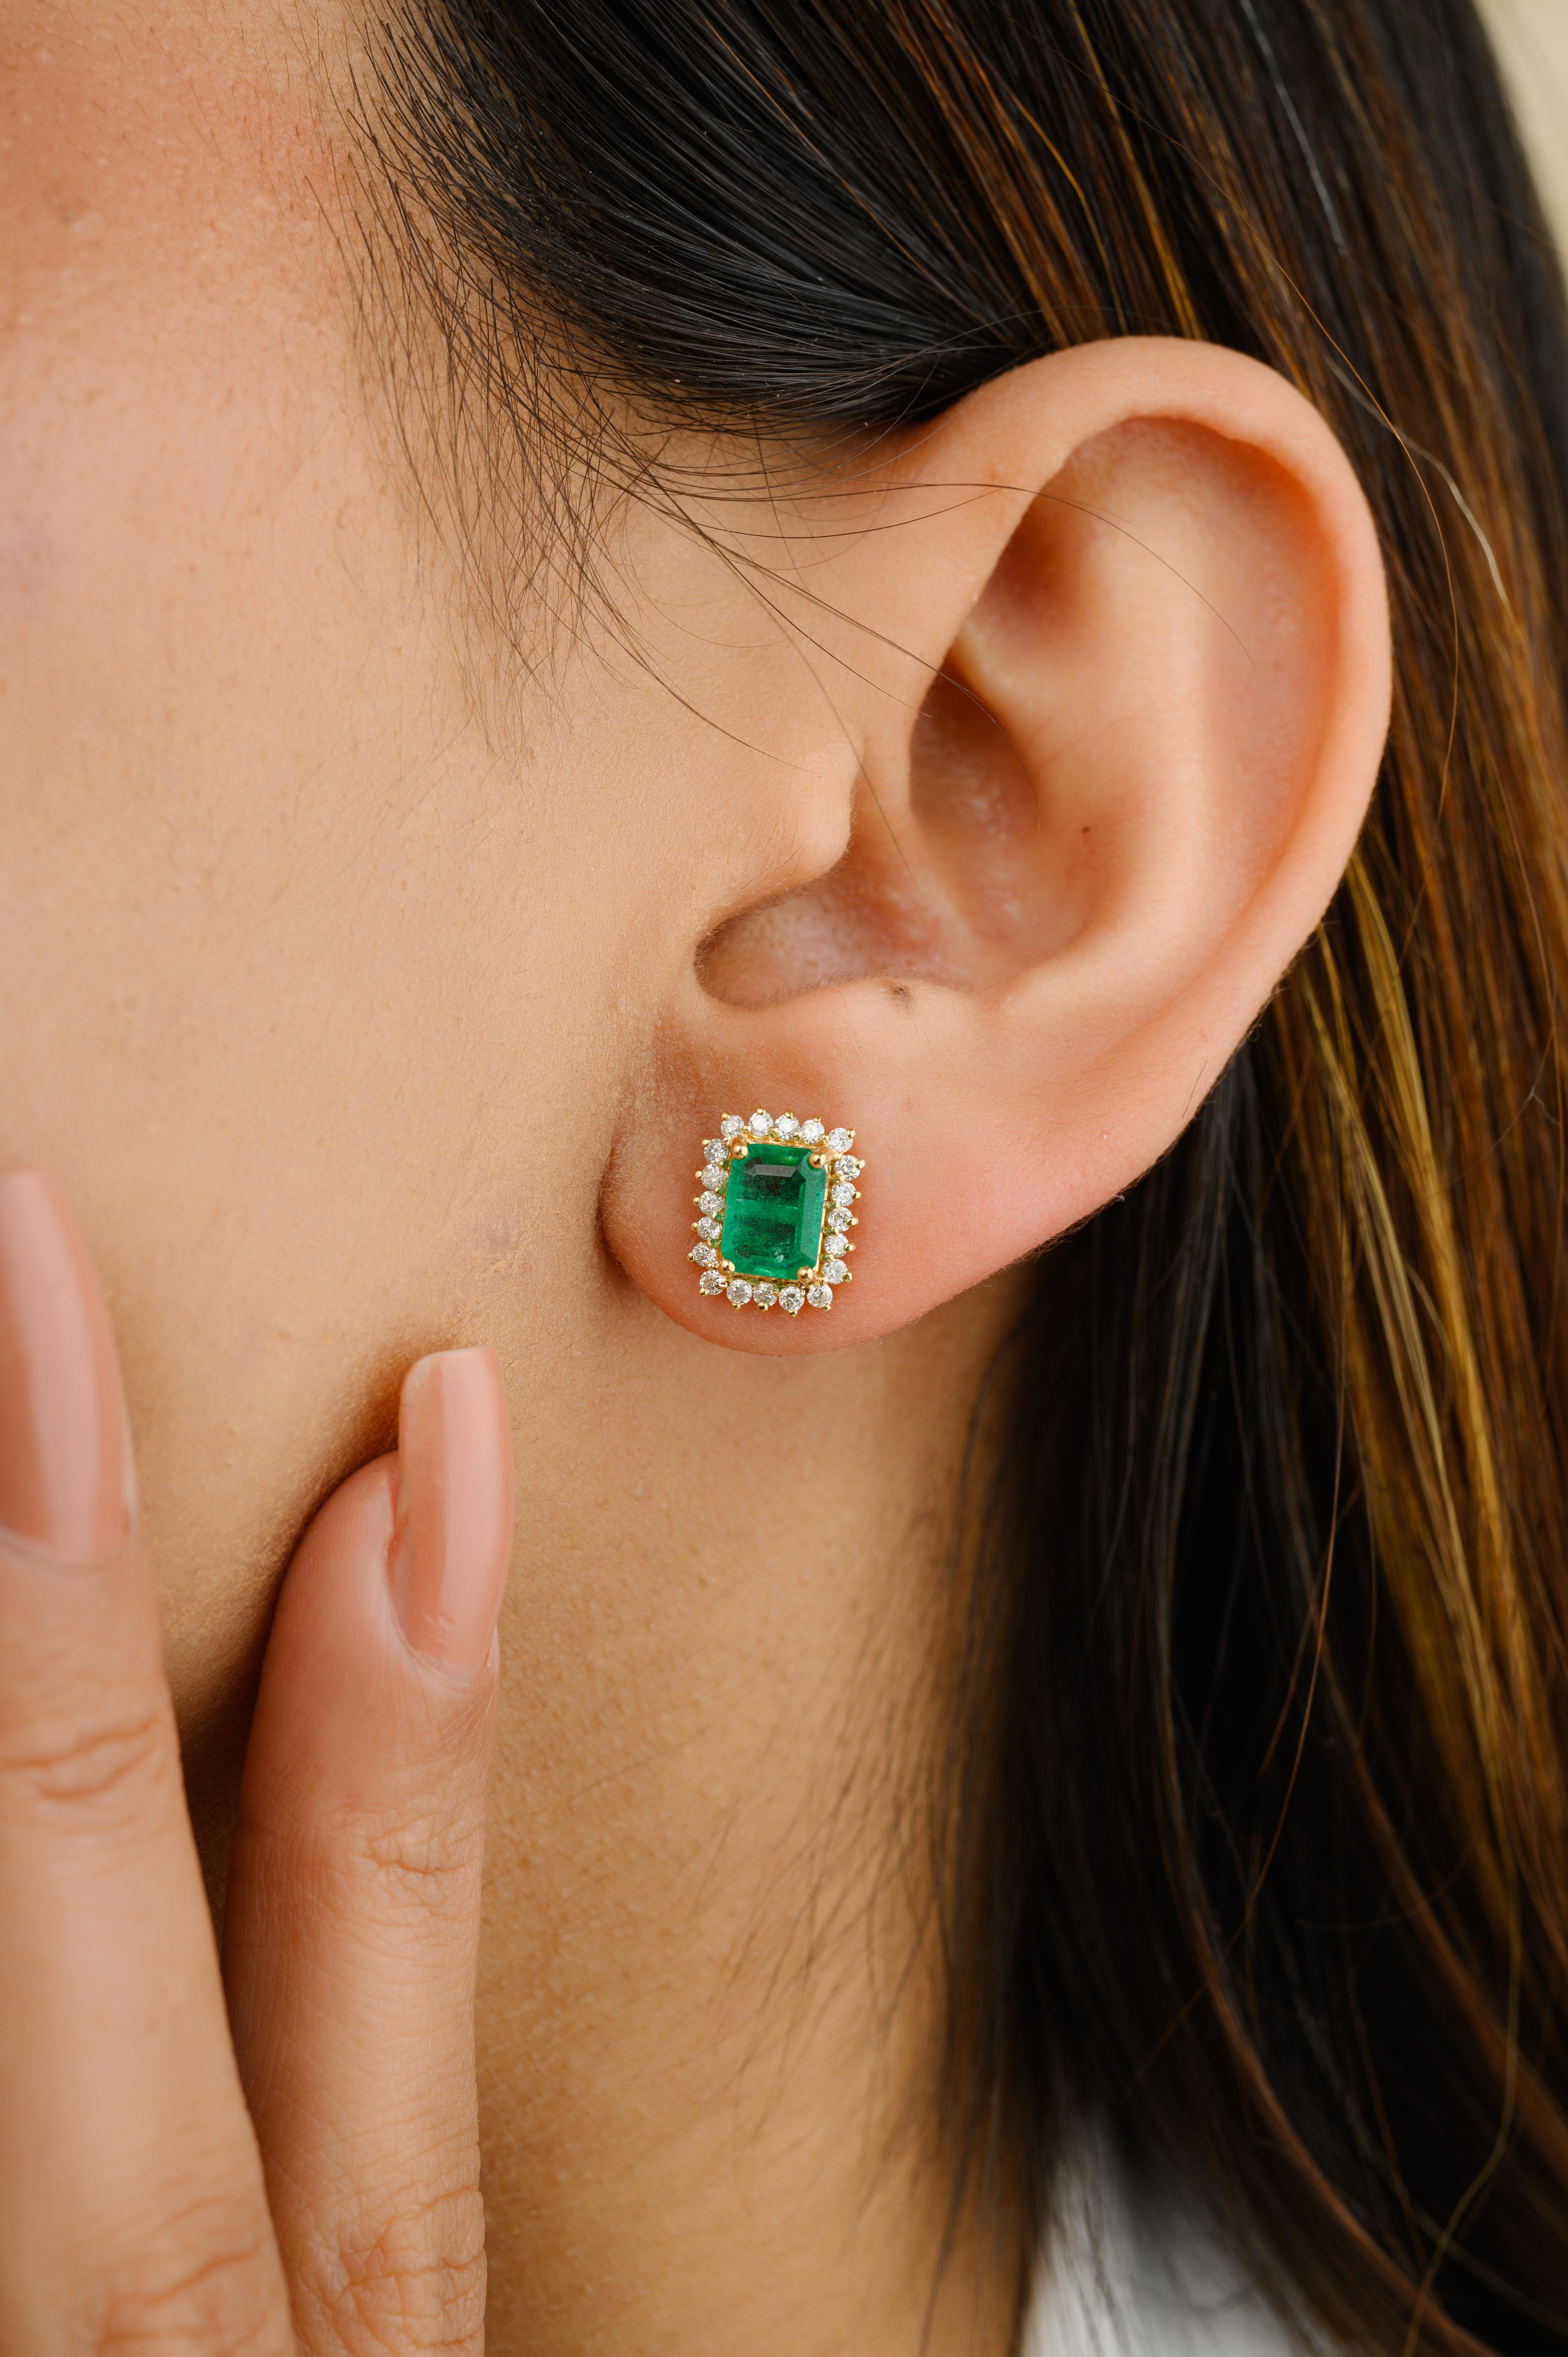 Certified Emerald Halo Diamond Stud Earrings in 18K Gold to make a statement with your look. You shall need studs earrings to make a statement with your look. These earrings create a sparkling, luxurious look featuring octagon cut emerald and round